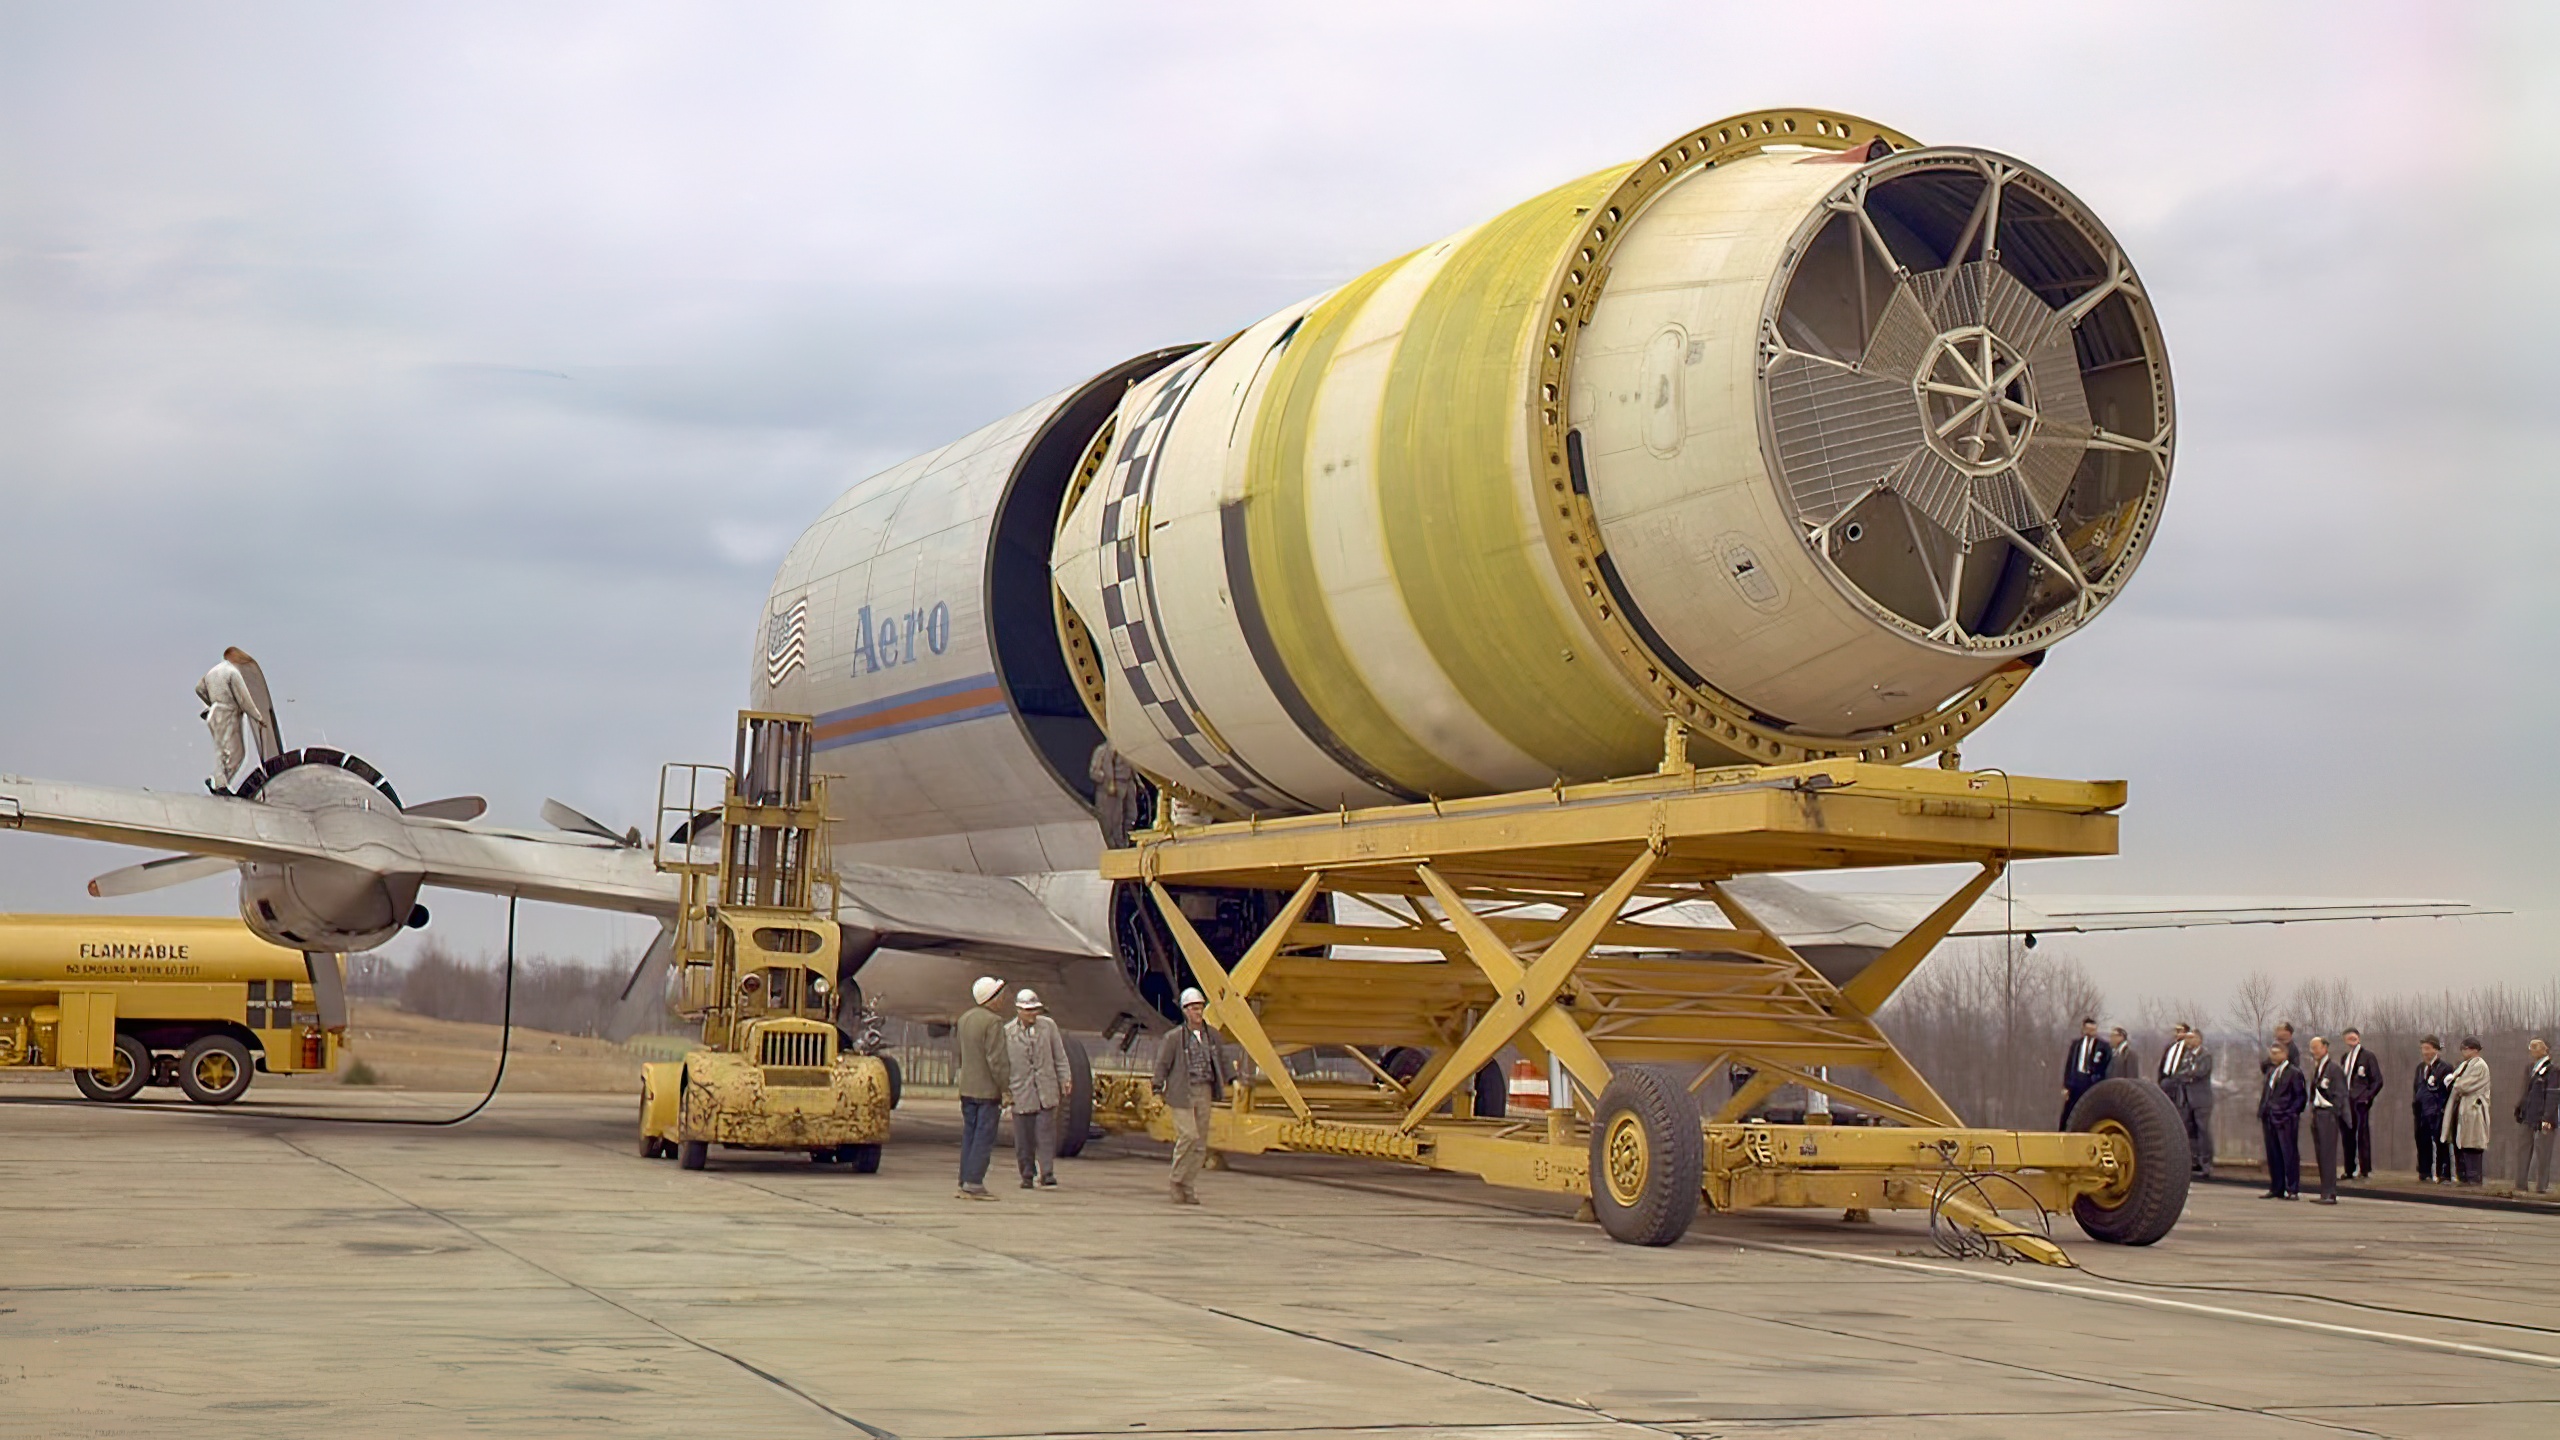 Saturn I's S-IV stage loaded onto a modified Boeing B-377 Stratocruiser for transport